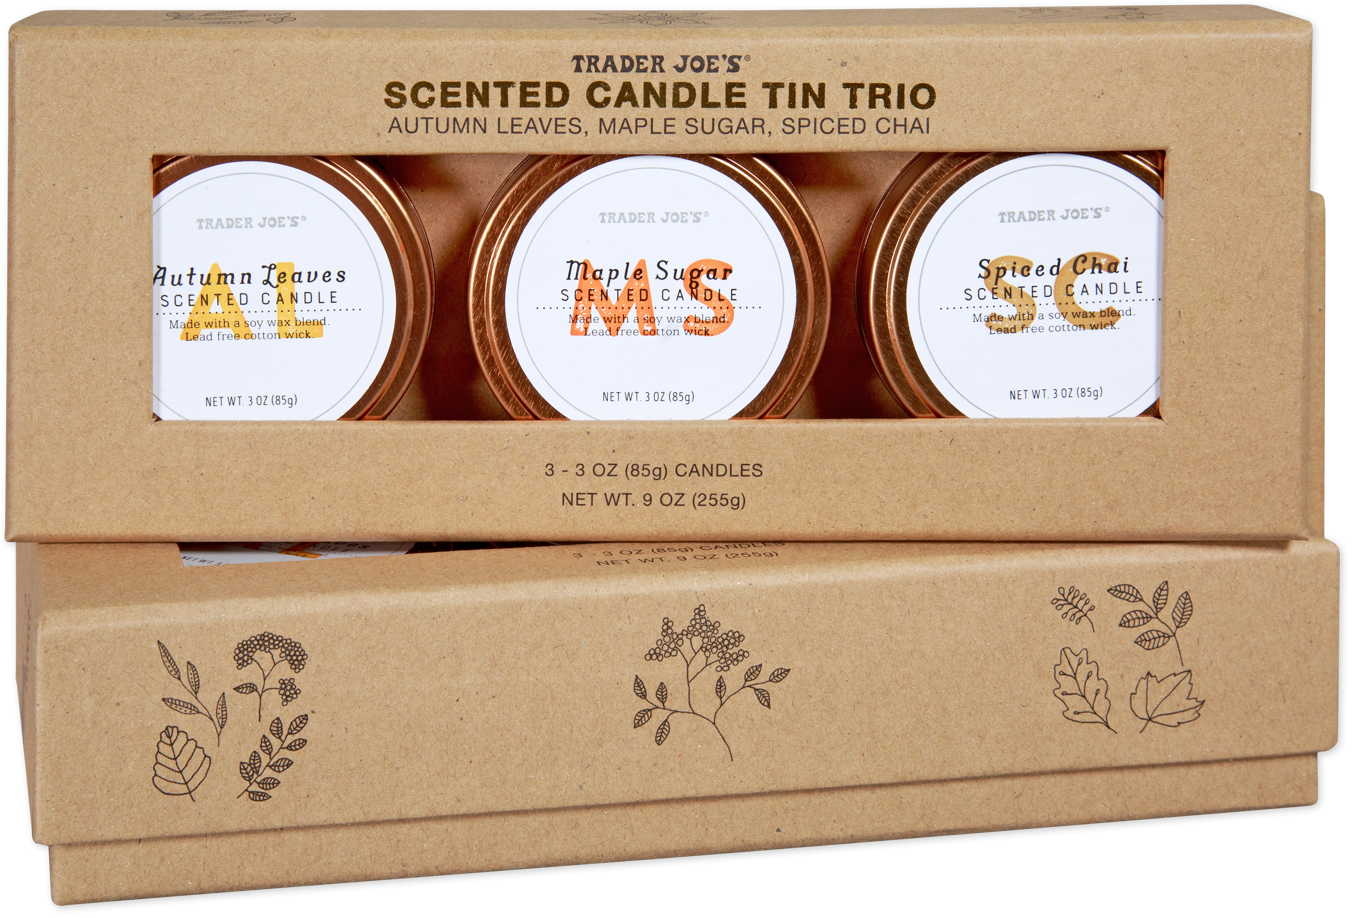 Trader Joe's Scented Candle Tin Trio